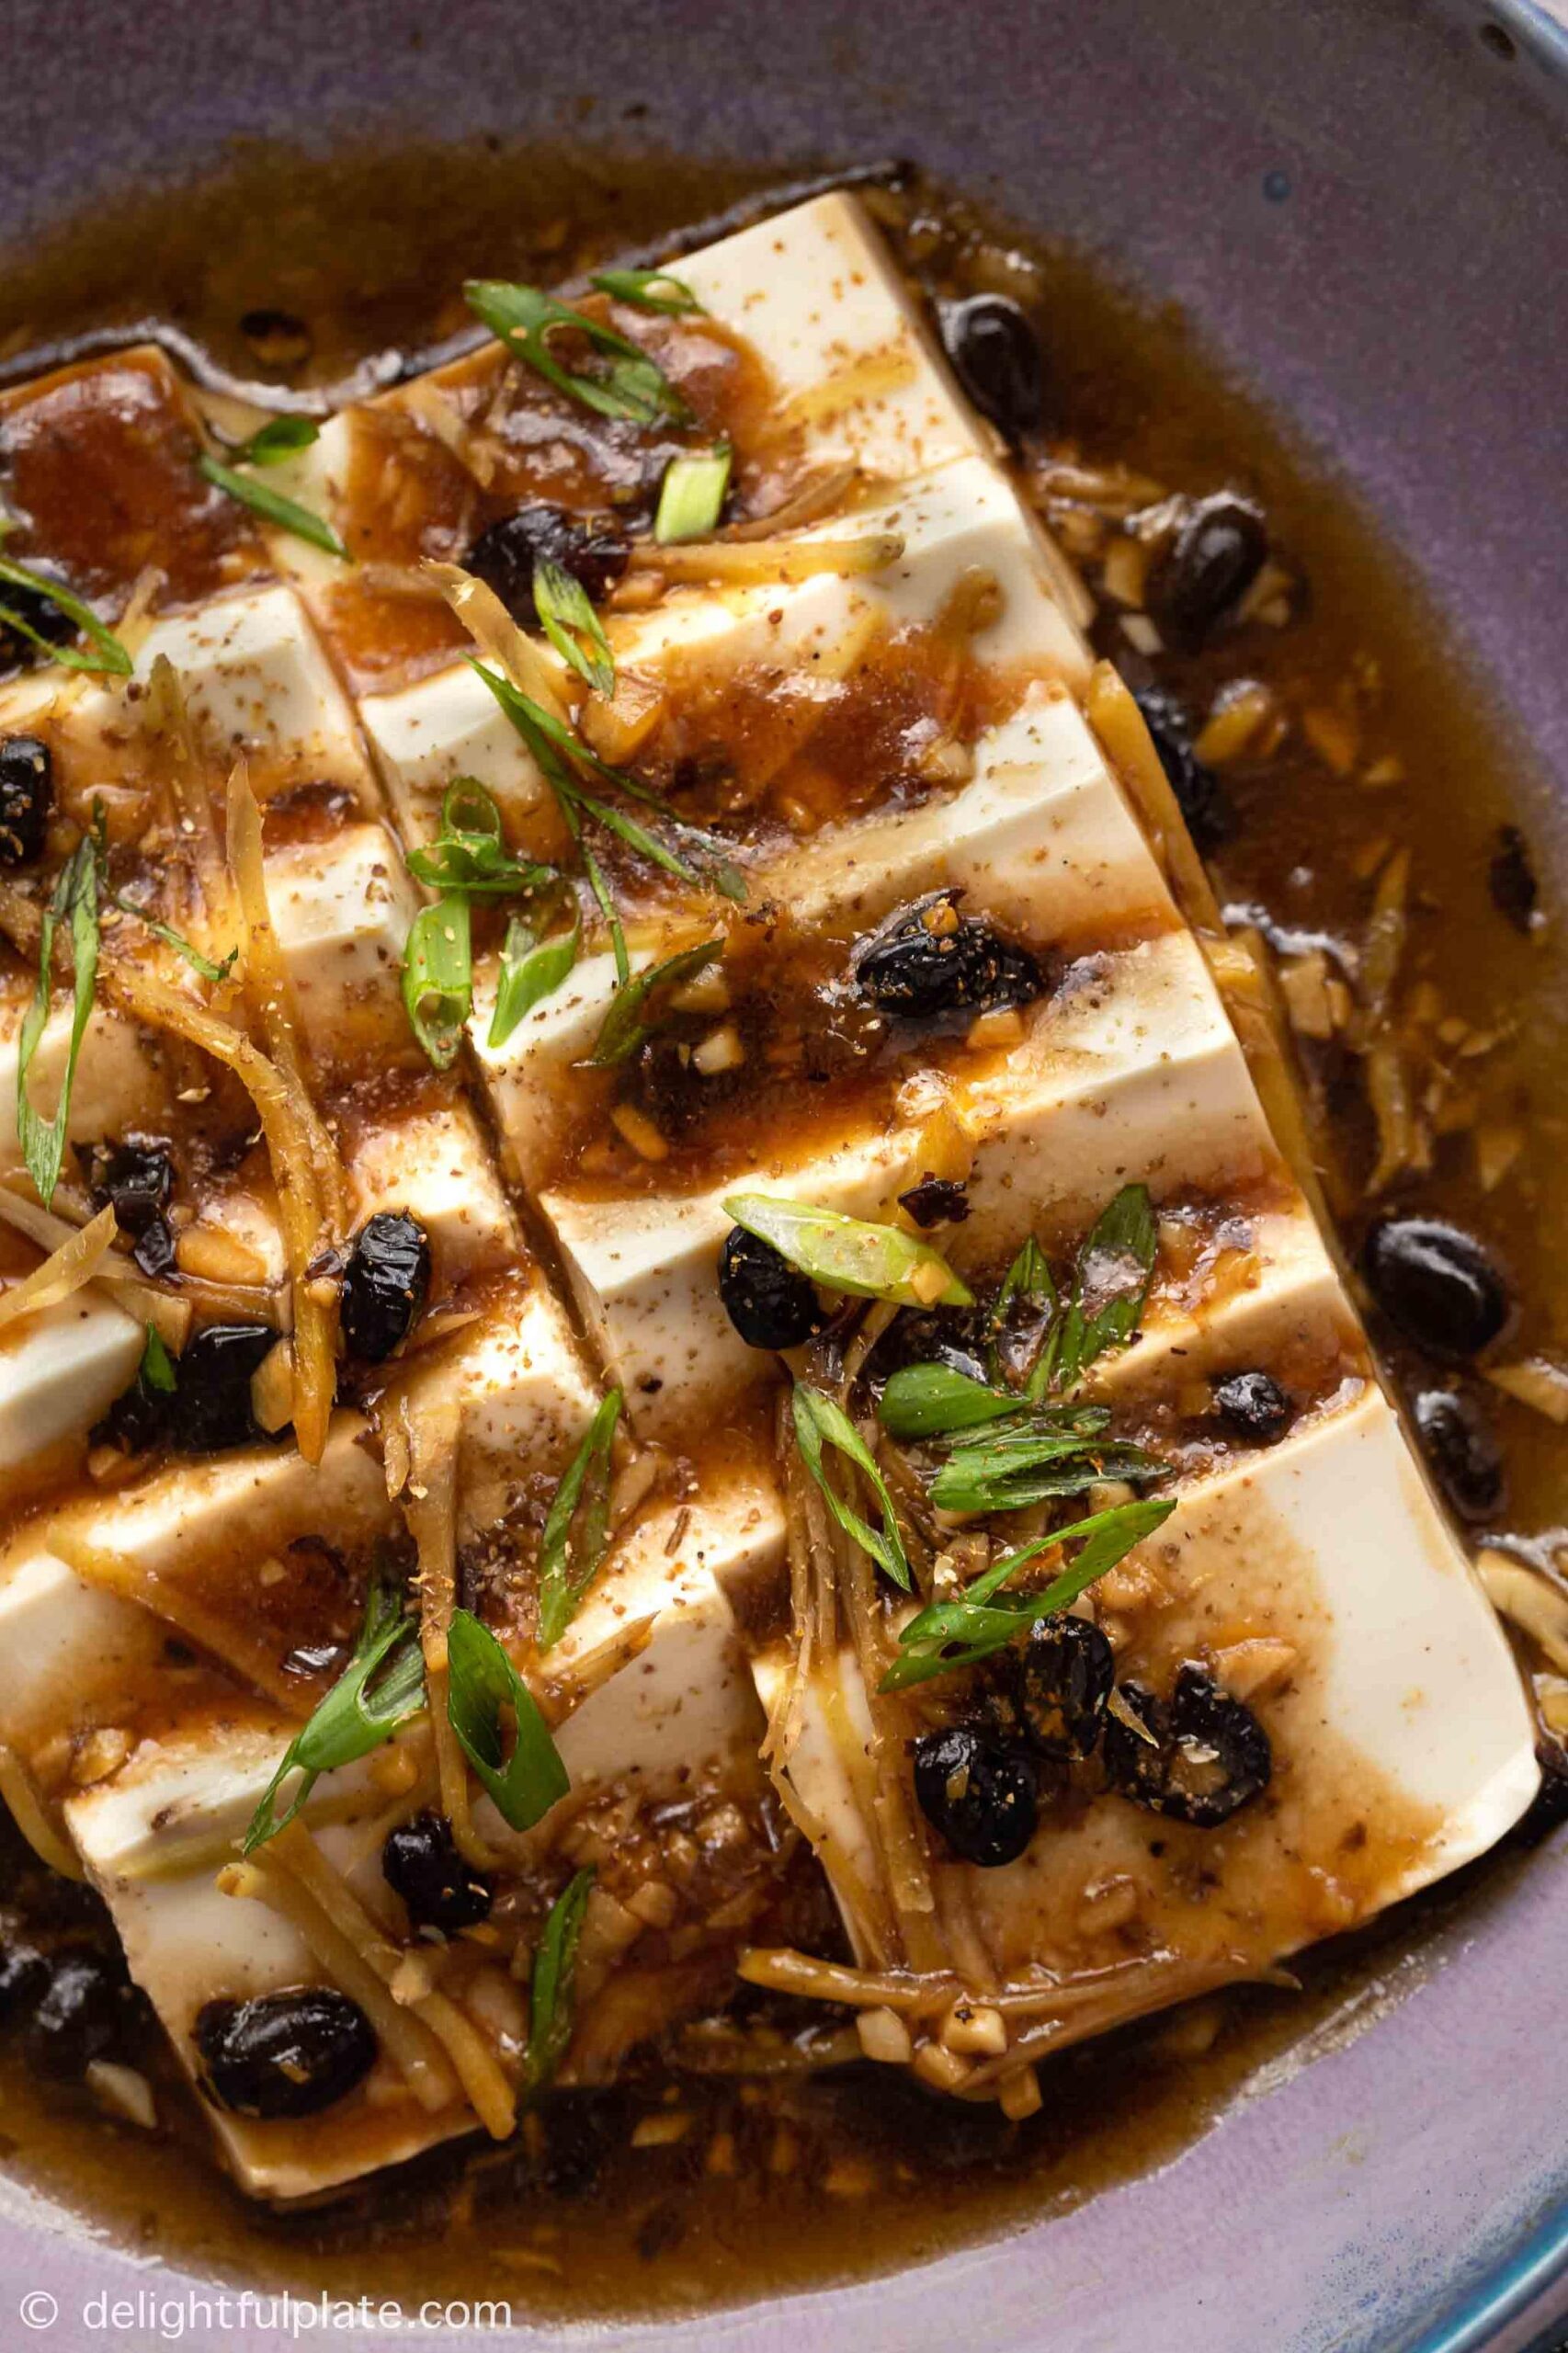  This bowl of fluffy tofu goodness will satisfy your cravings and keep you feeling light.